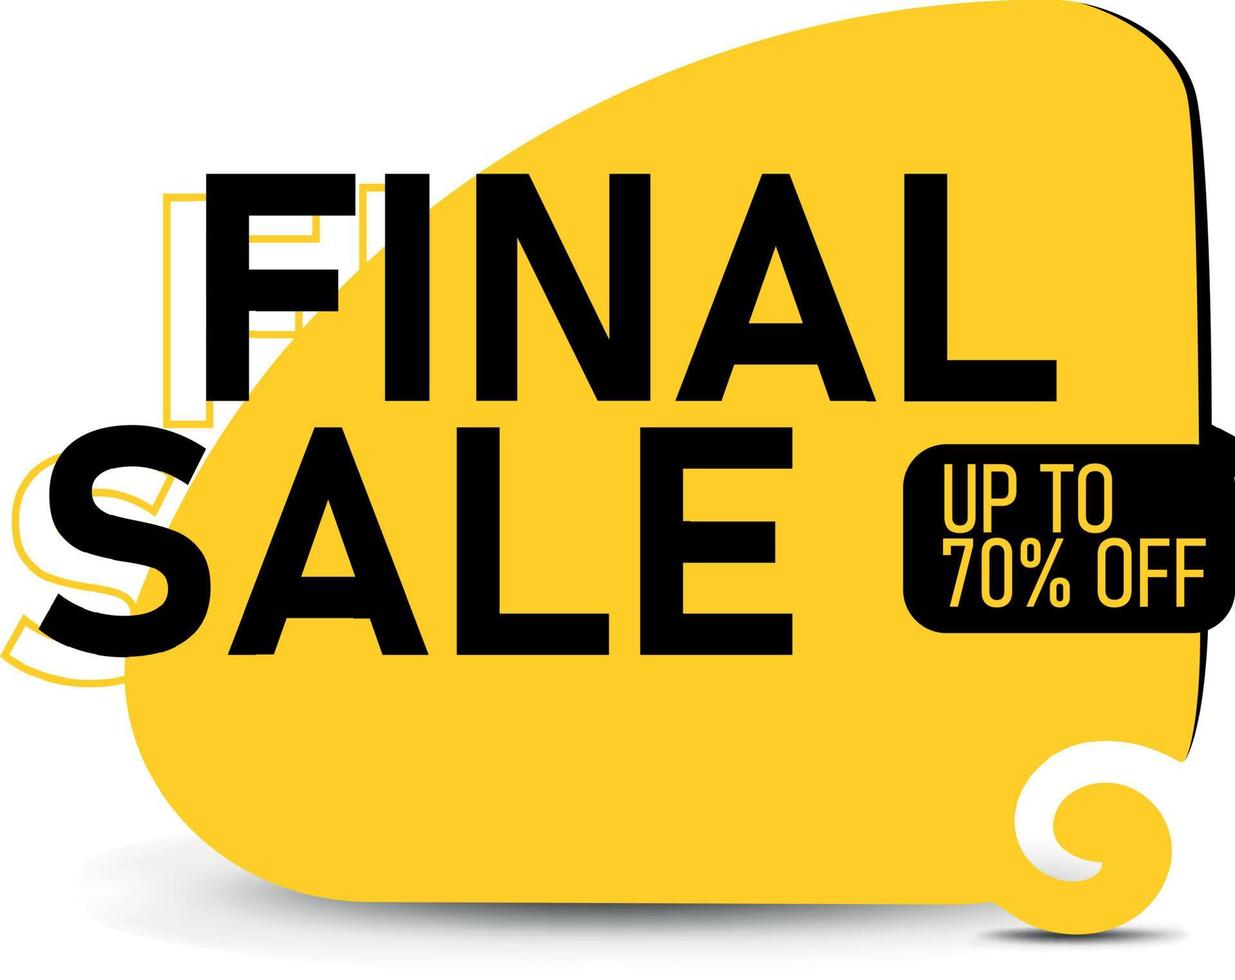 Black and yellow final sale banner on white background in 3d style, up to 70 off. Vector illustration.